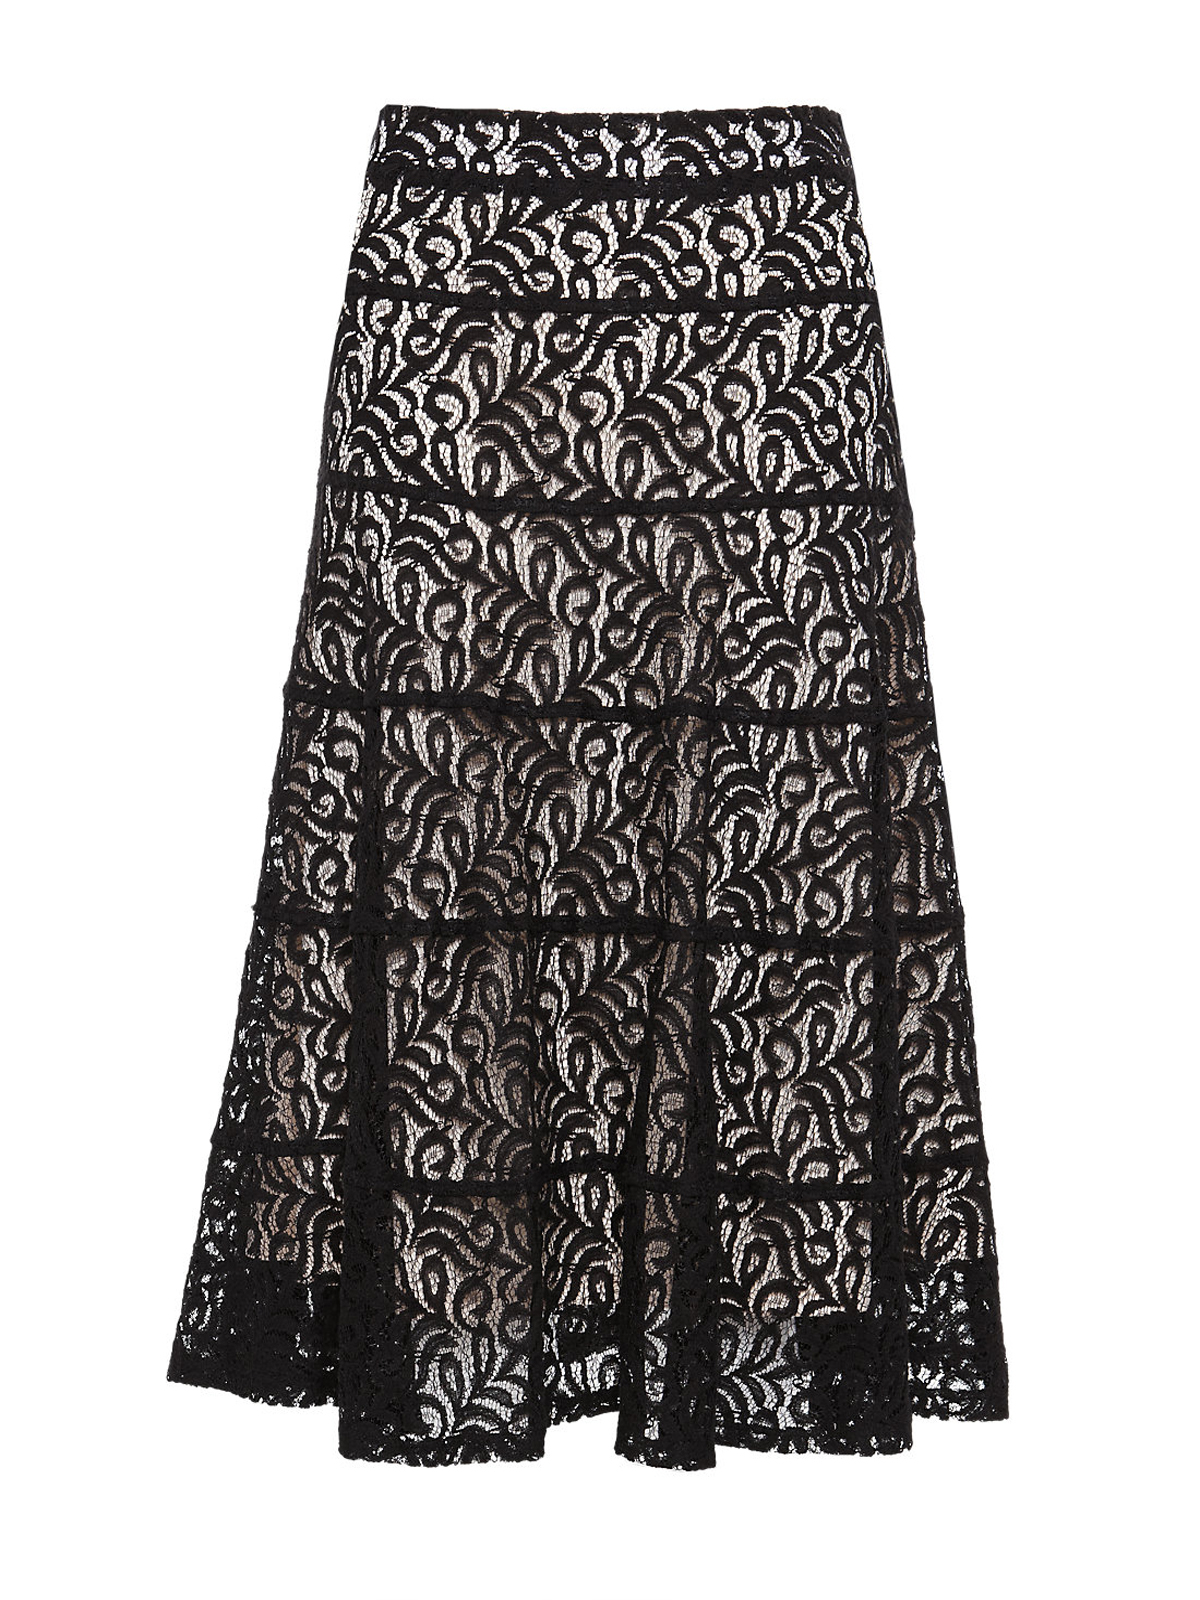 Marks and Spencer - - M&5 ASSORTED Skirts - Size 12 to 22